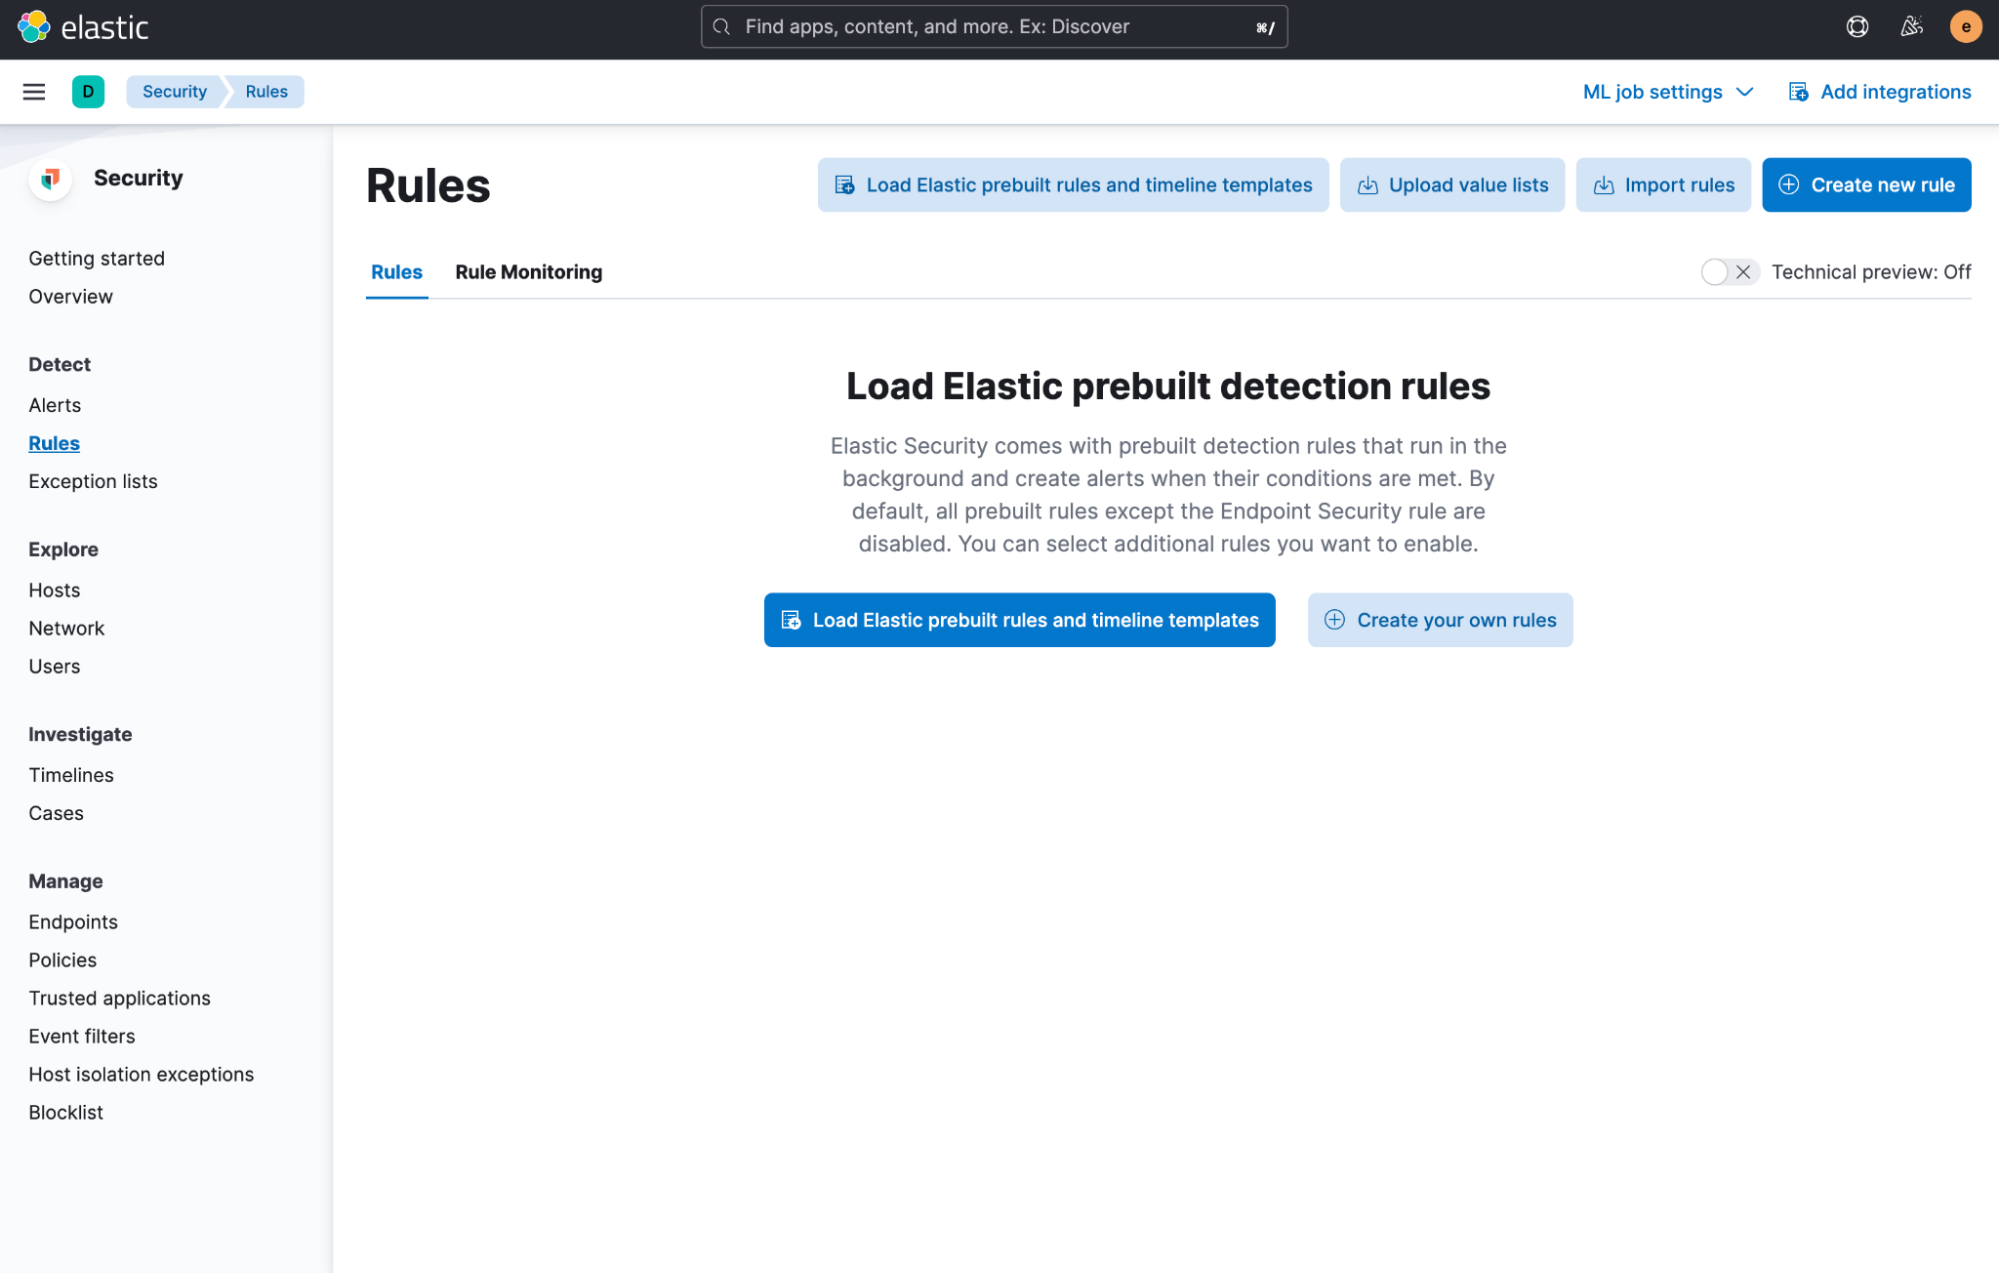 In order to enable and use the installed rules, you can navigate to Security > Rules and select Load Elastic prebuild rules and timeline templates.